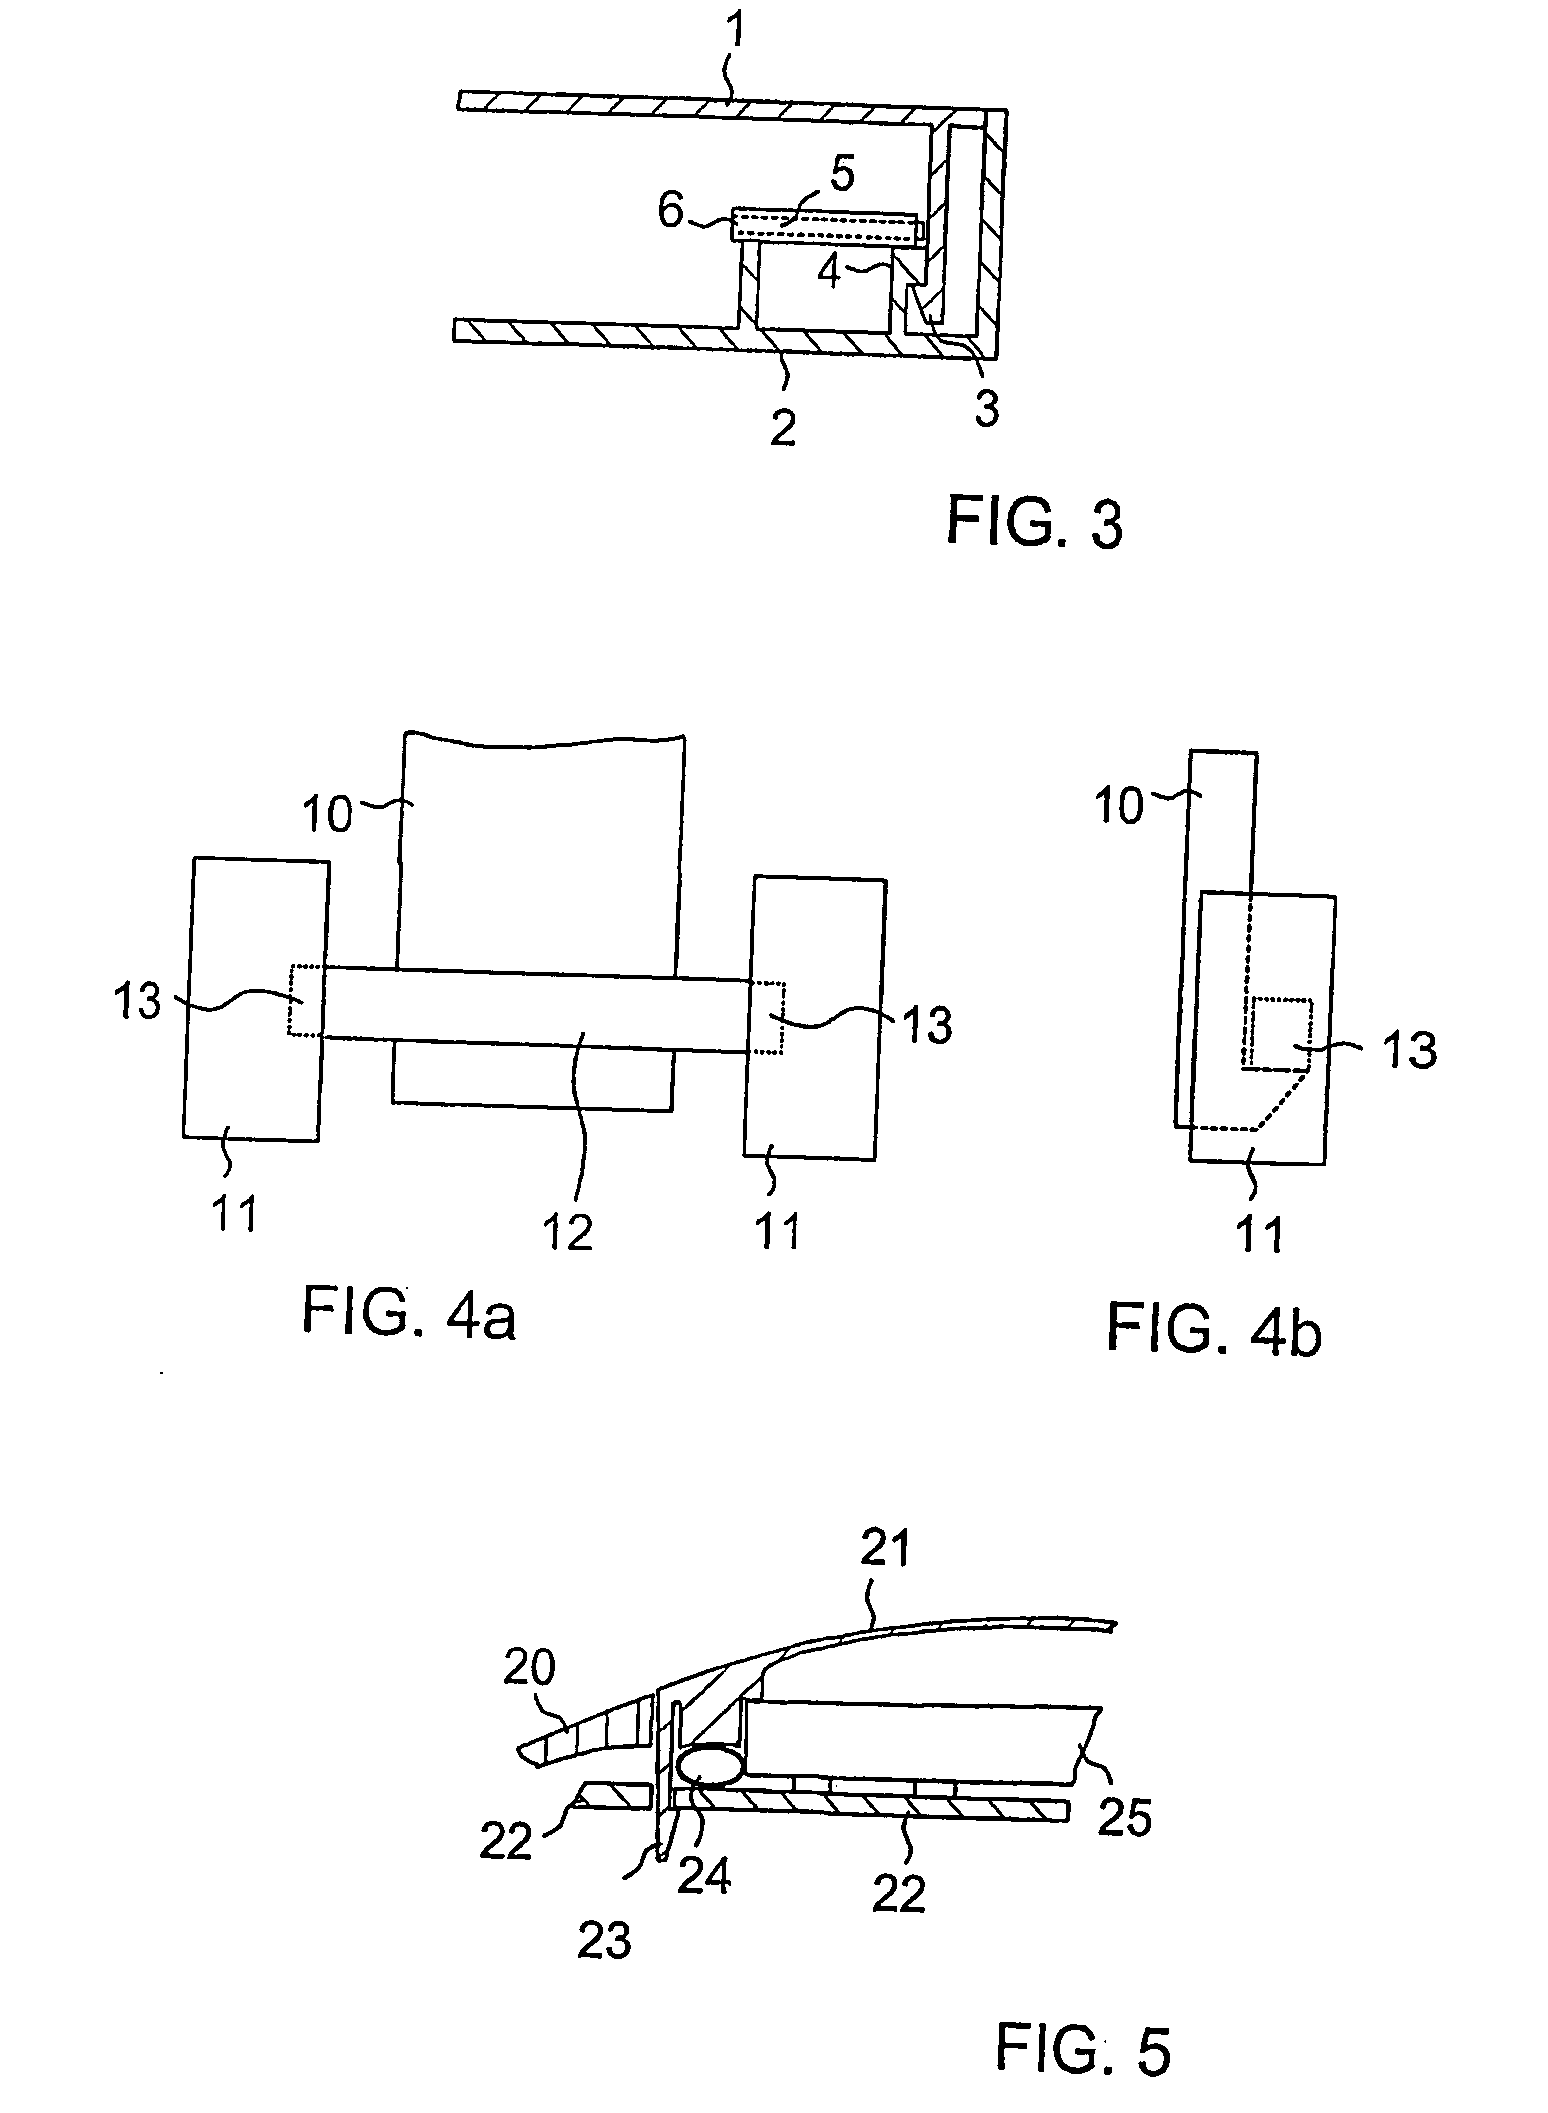 Method of releasing an attachment